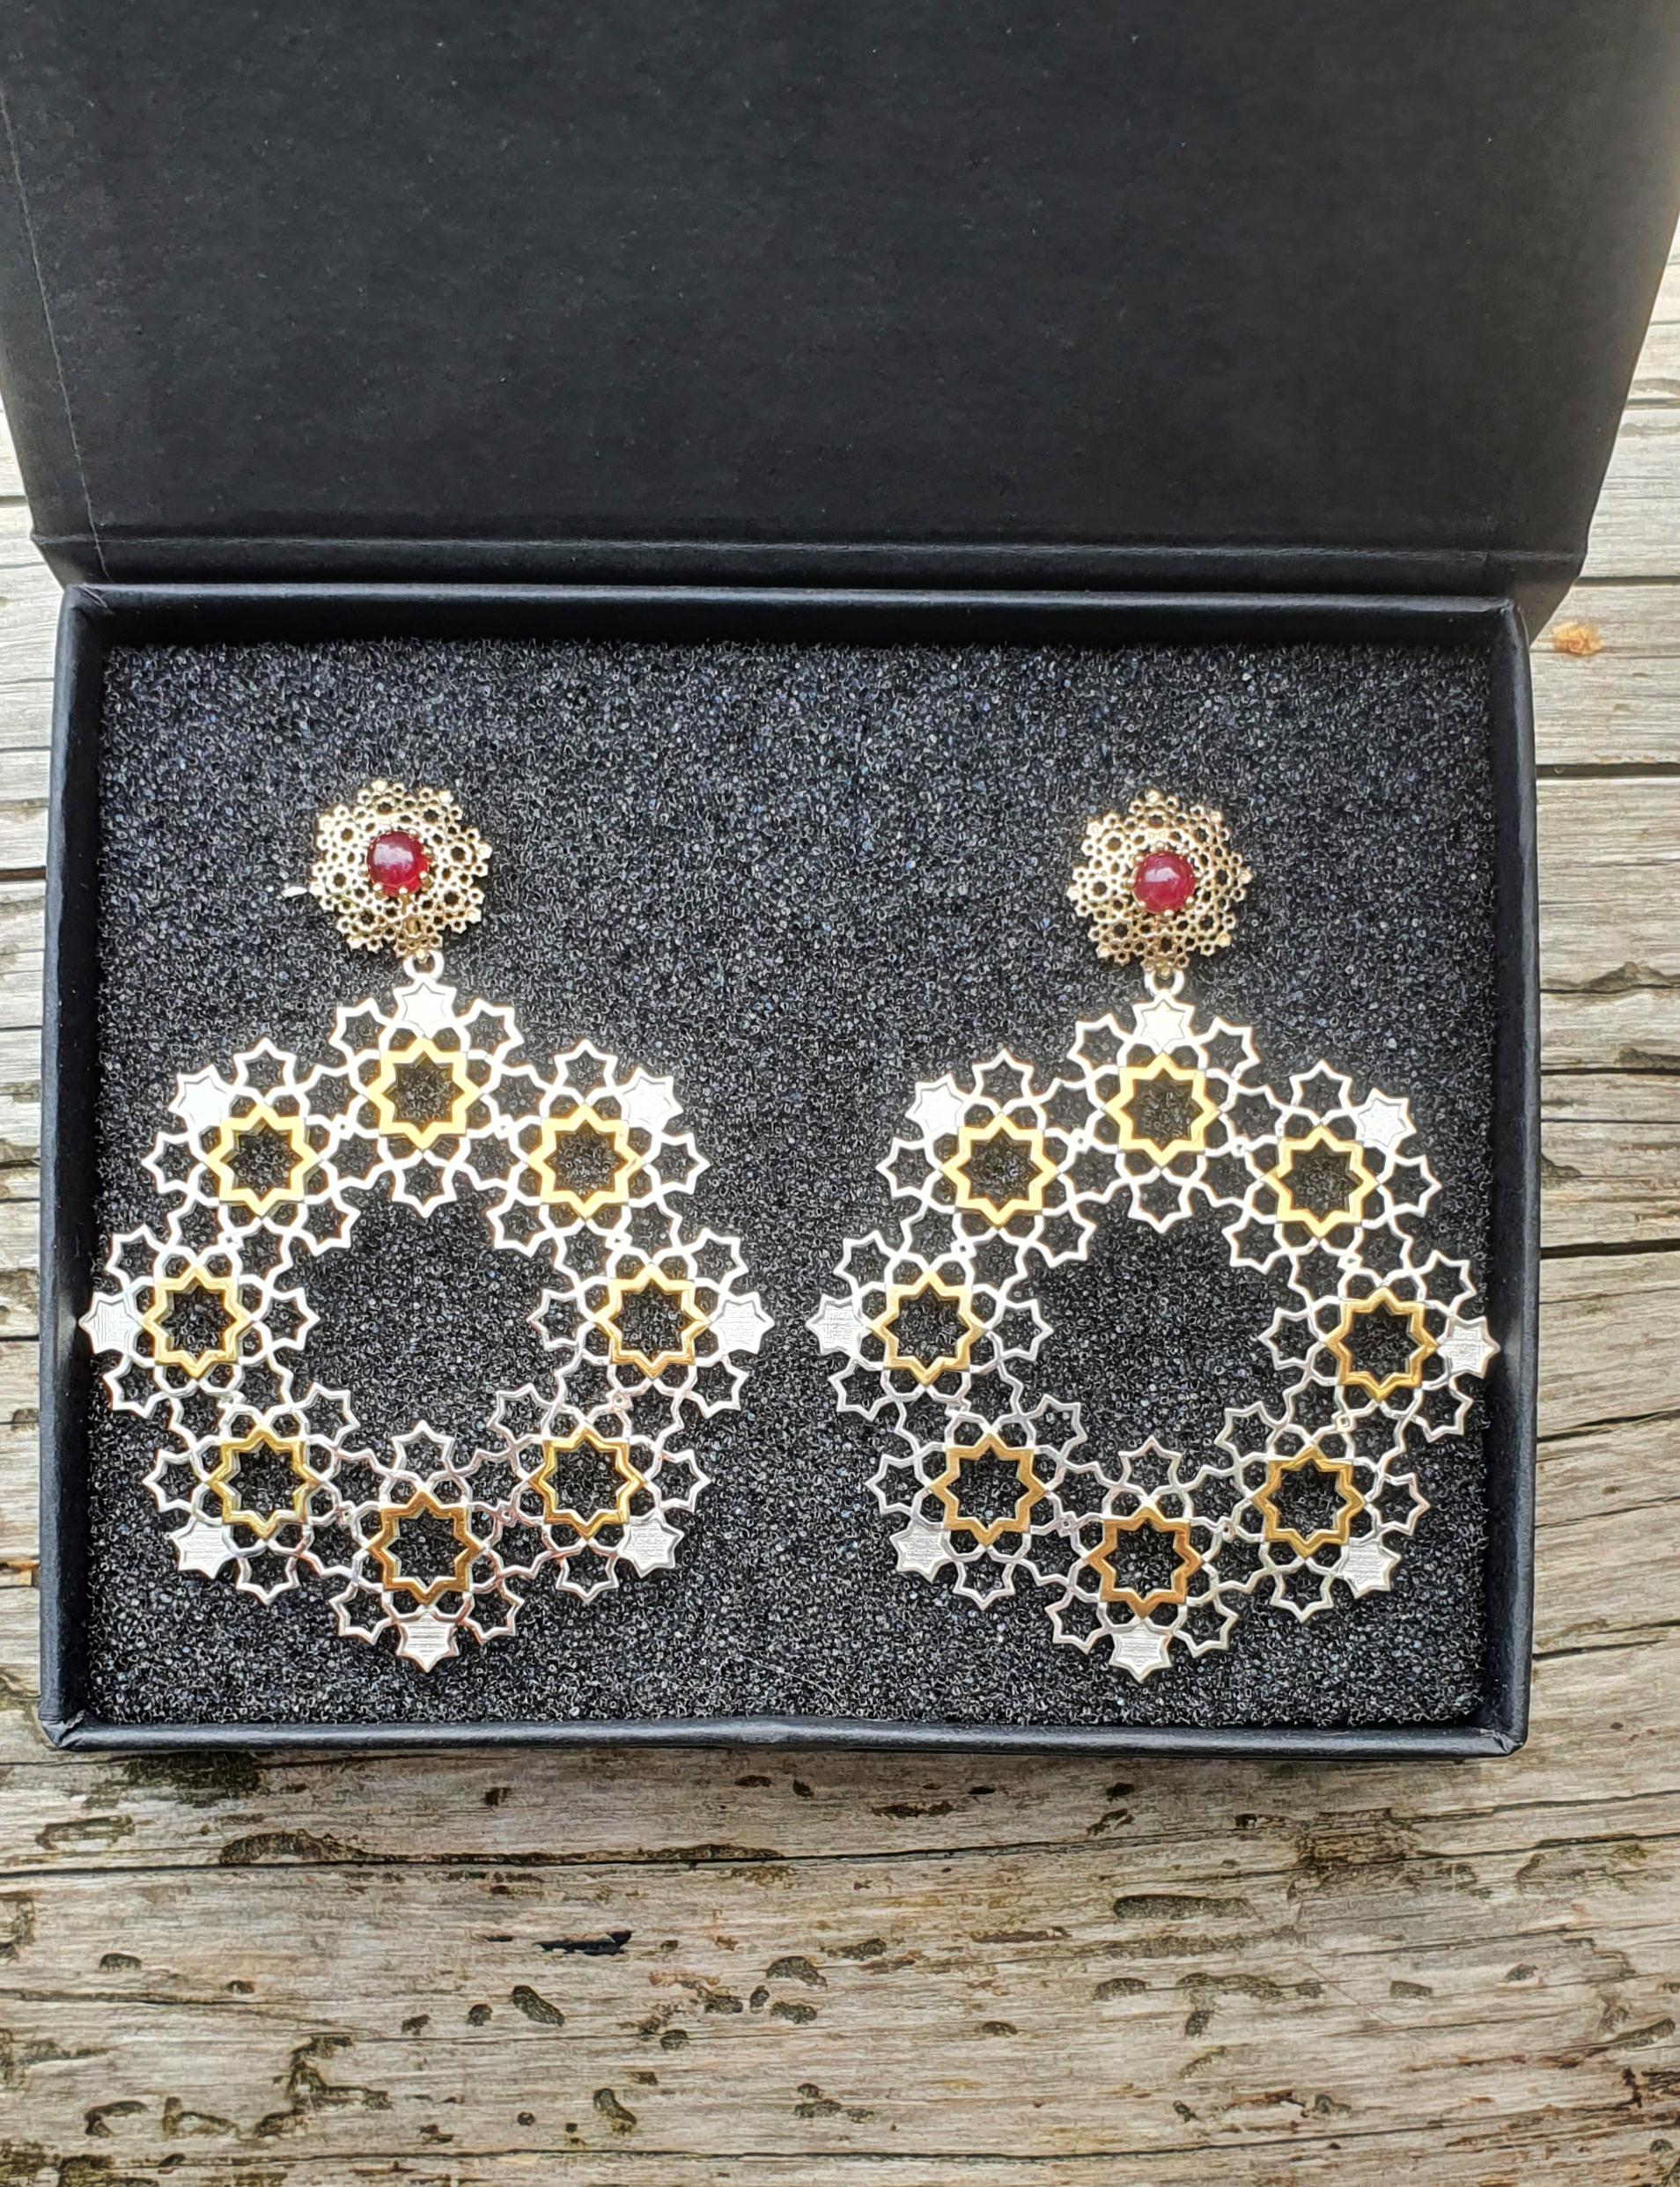 Large 14k gold and 925 silver earrings studs. 

Genuine ruby earrings. Two Parts Earrings. Transformer studs. Two metal earrings.

Earrings made of two materials: 14 kt yellow gold and 925 purity silver.
Made of 14k yellow gold (upper part with